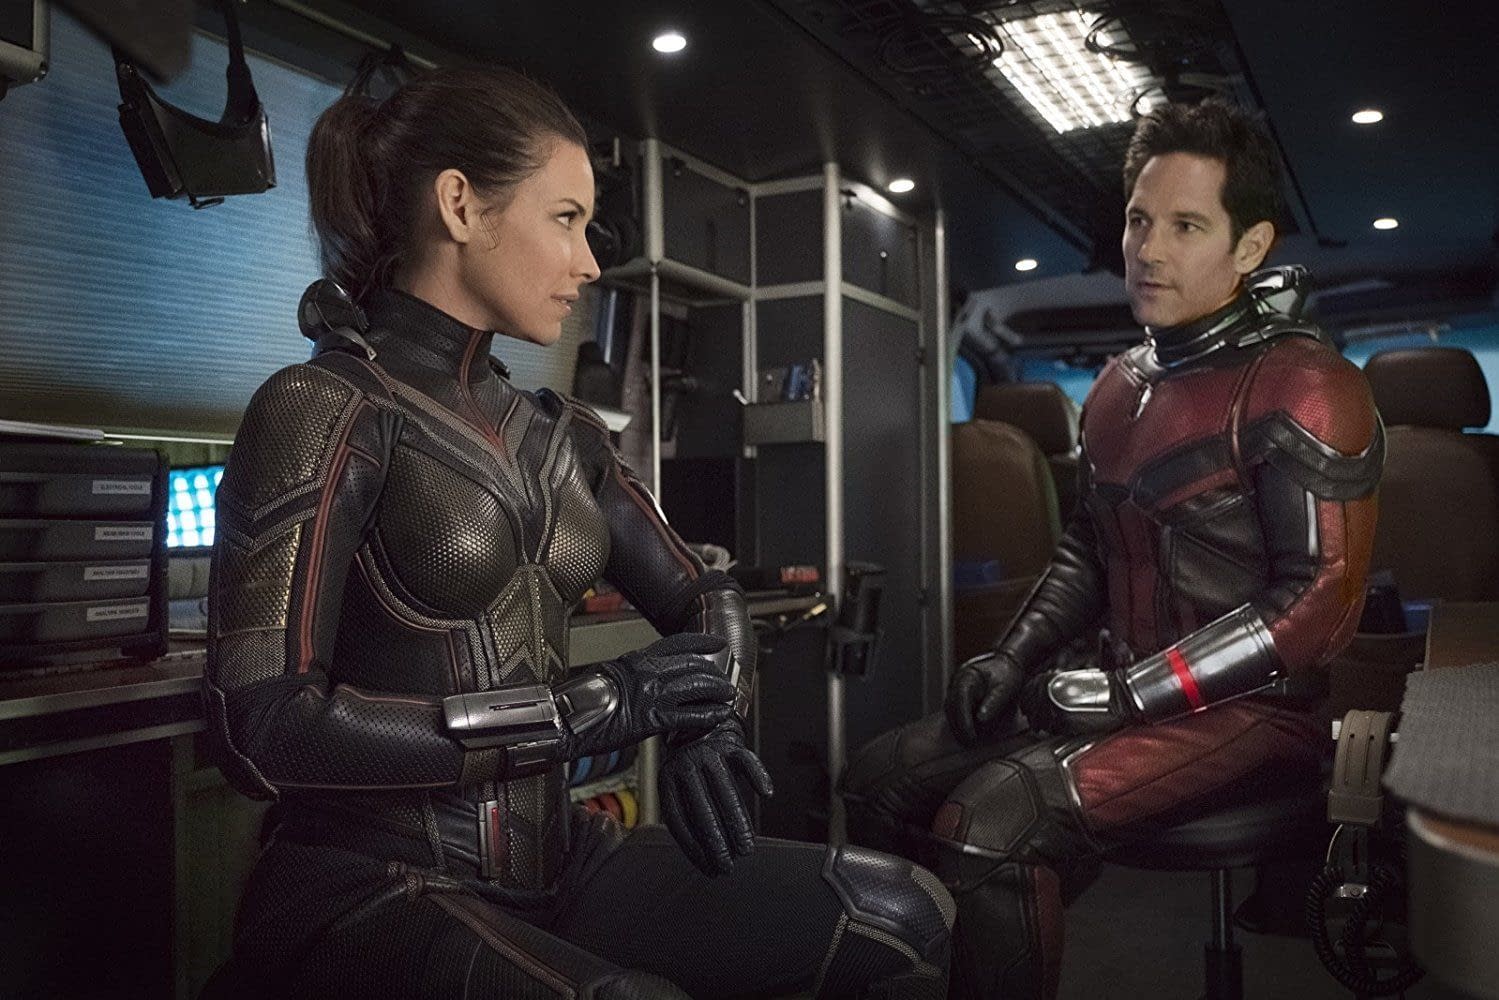 Ant-Man and The Wasp Pulls in $11.5M in Thursday Previews